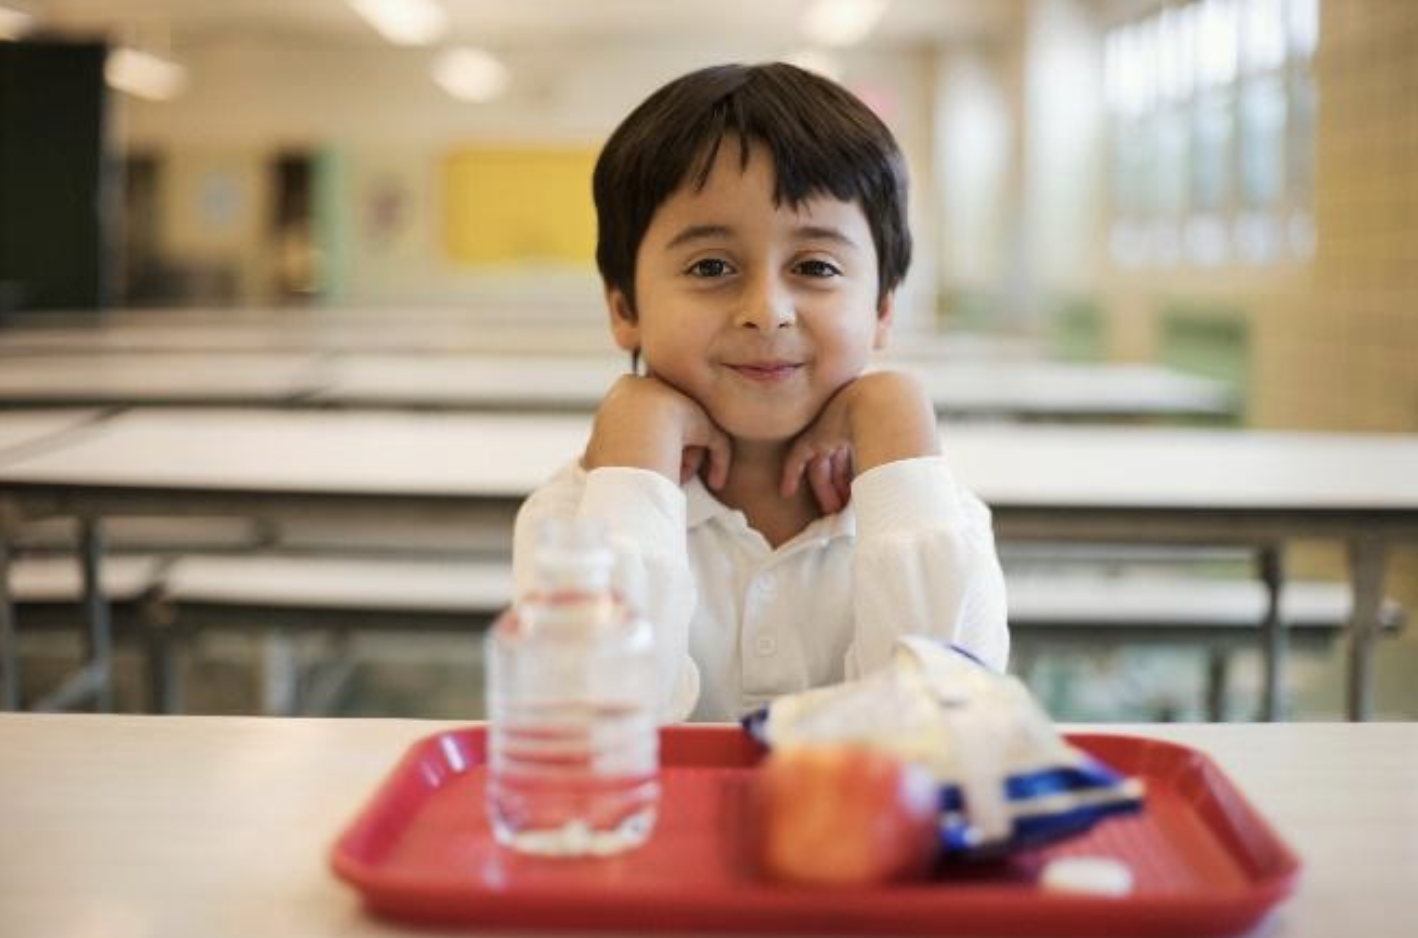 young boy smiling with school lunch